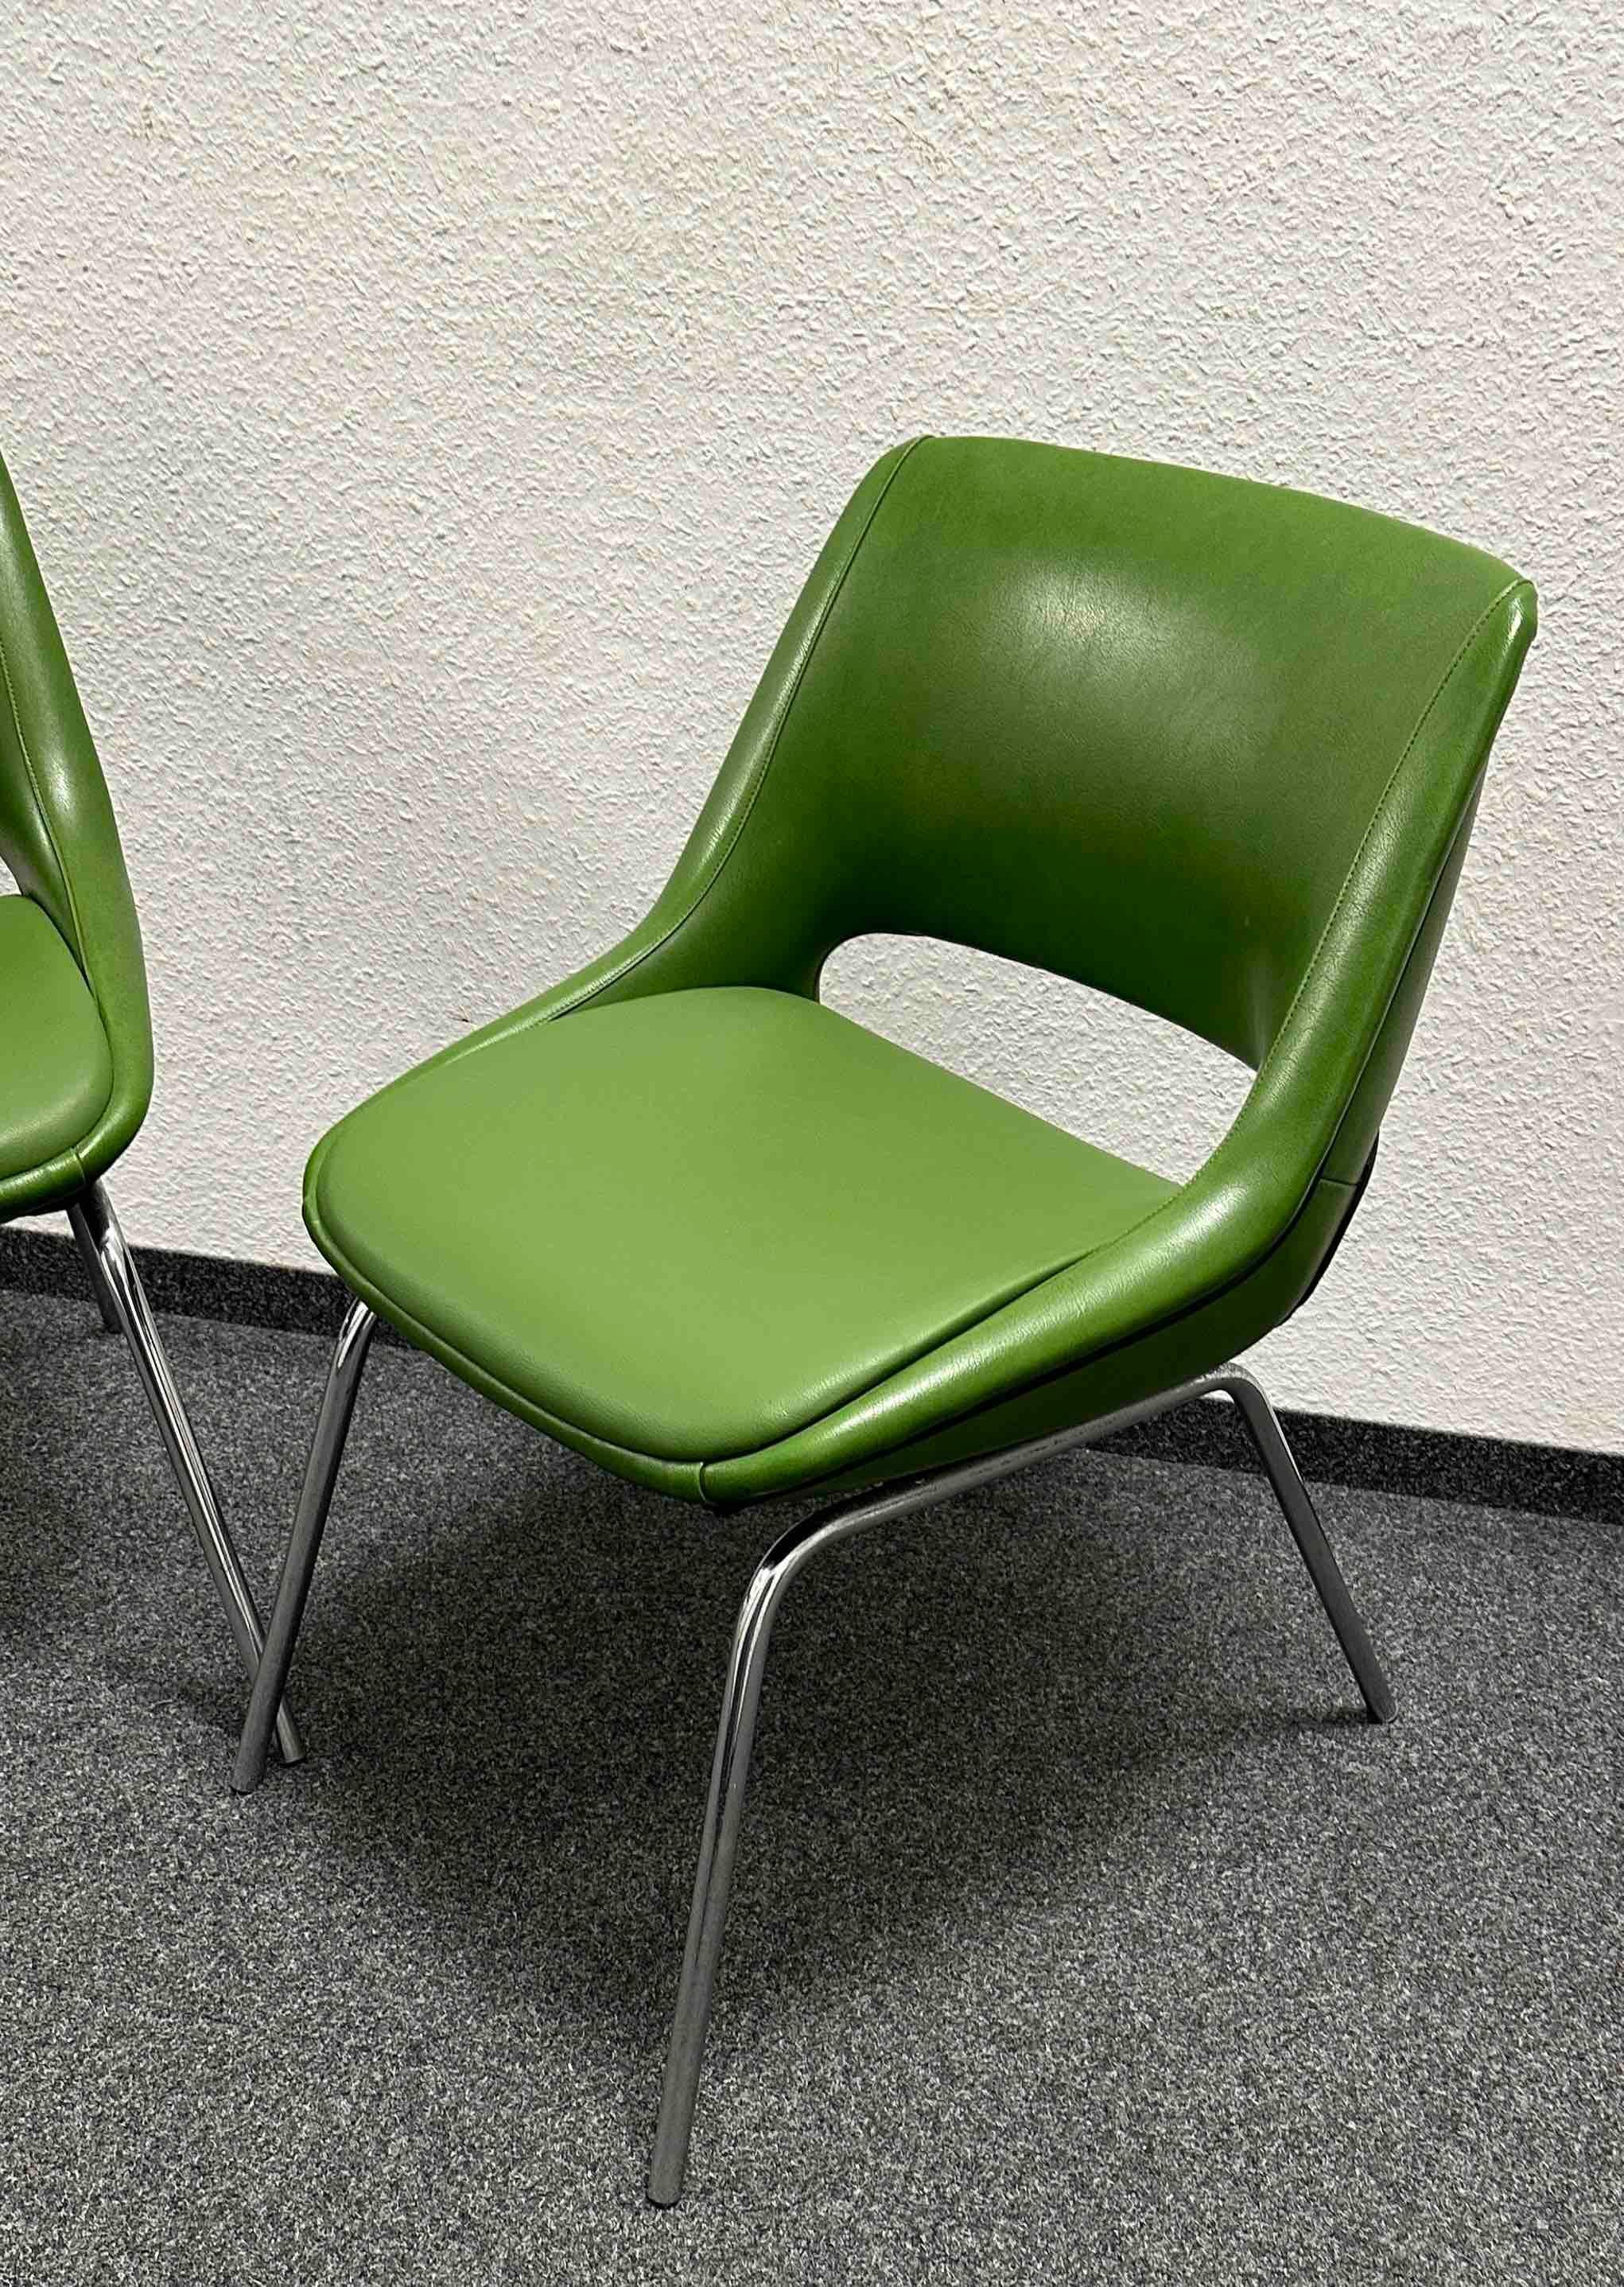 Two Chrome Base, Green Faux Leather Chairs Made by Blaha, Austria, 1970s For Sale 8